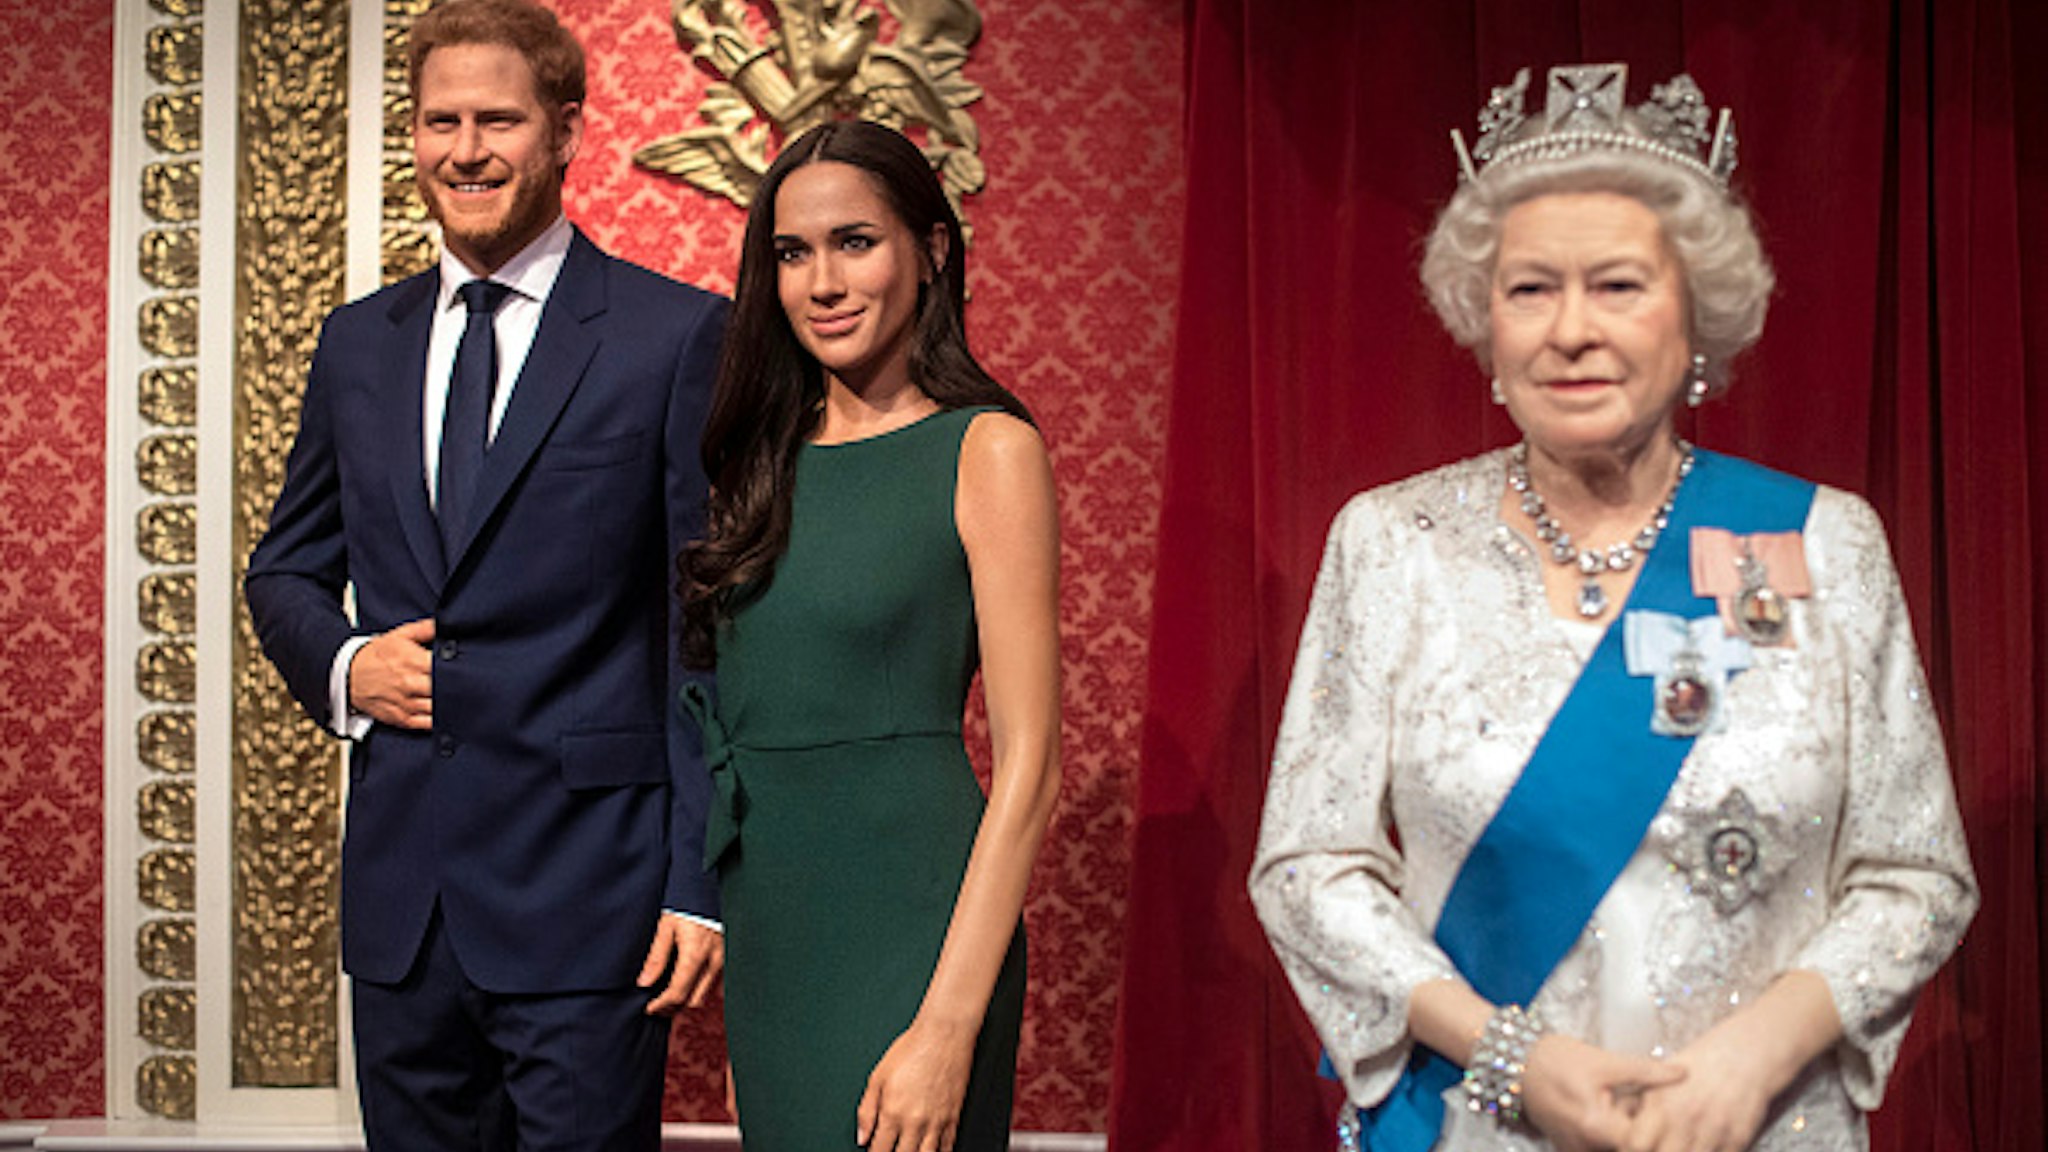 The figures of the Duke and Duchess of Sussex in their original positions next to Queen Elizabeth II, as Madame Tussauds London moved its figures of the couple from its Royal Family set to elsewhere in the attraction, in the wake of the announcement that they will take a step back as "senior members" of the royal family, dividing their time between the UK and North America.